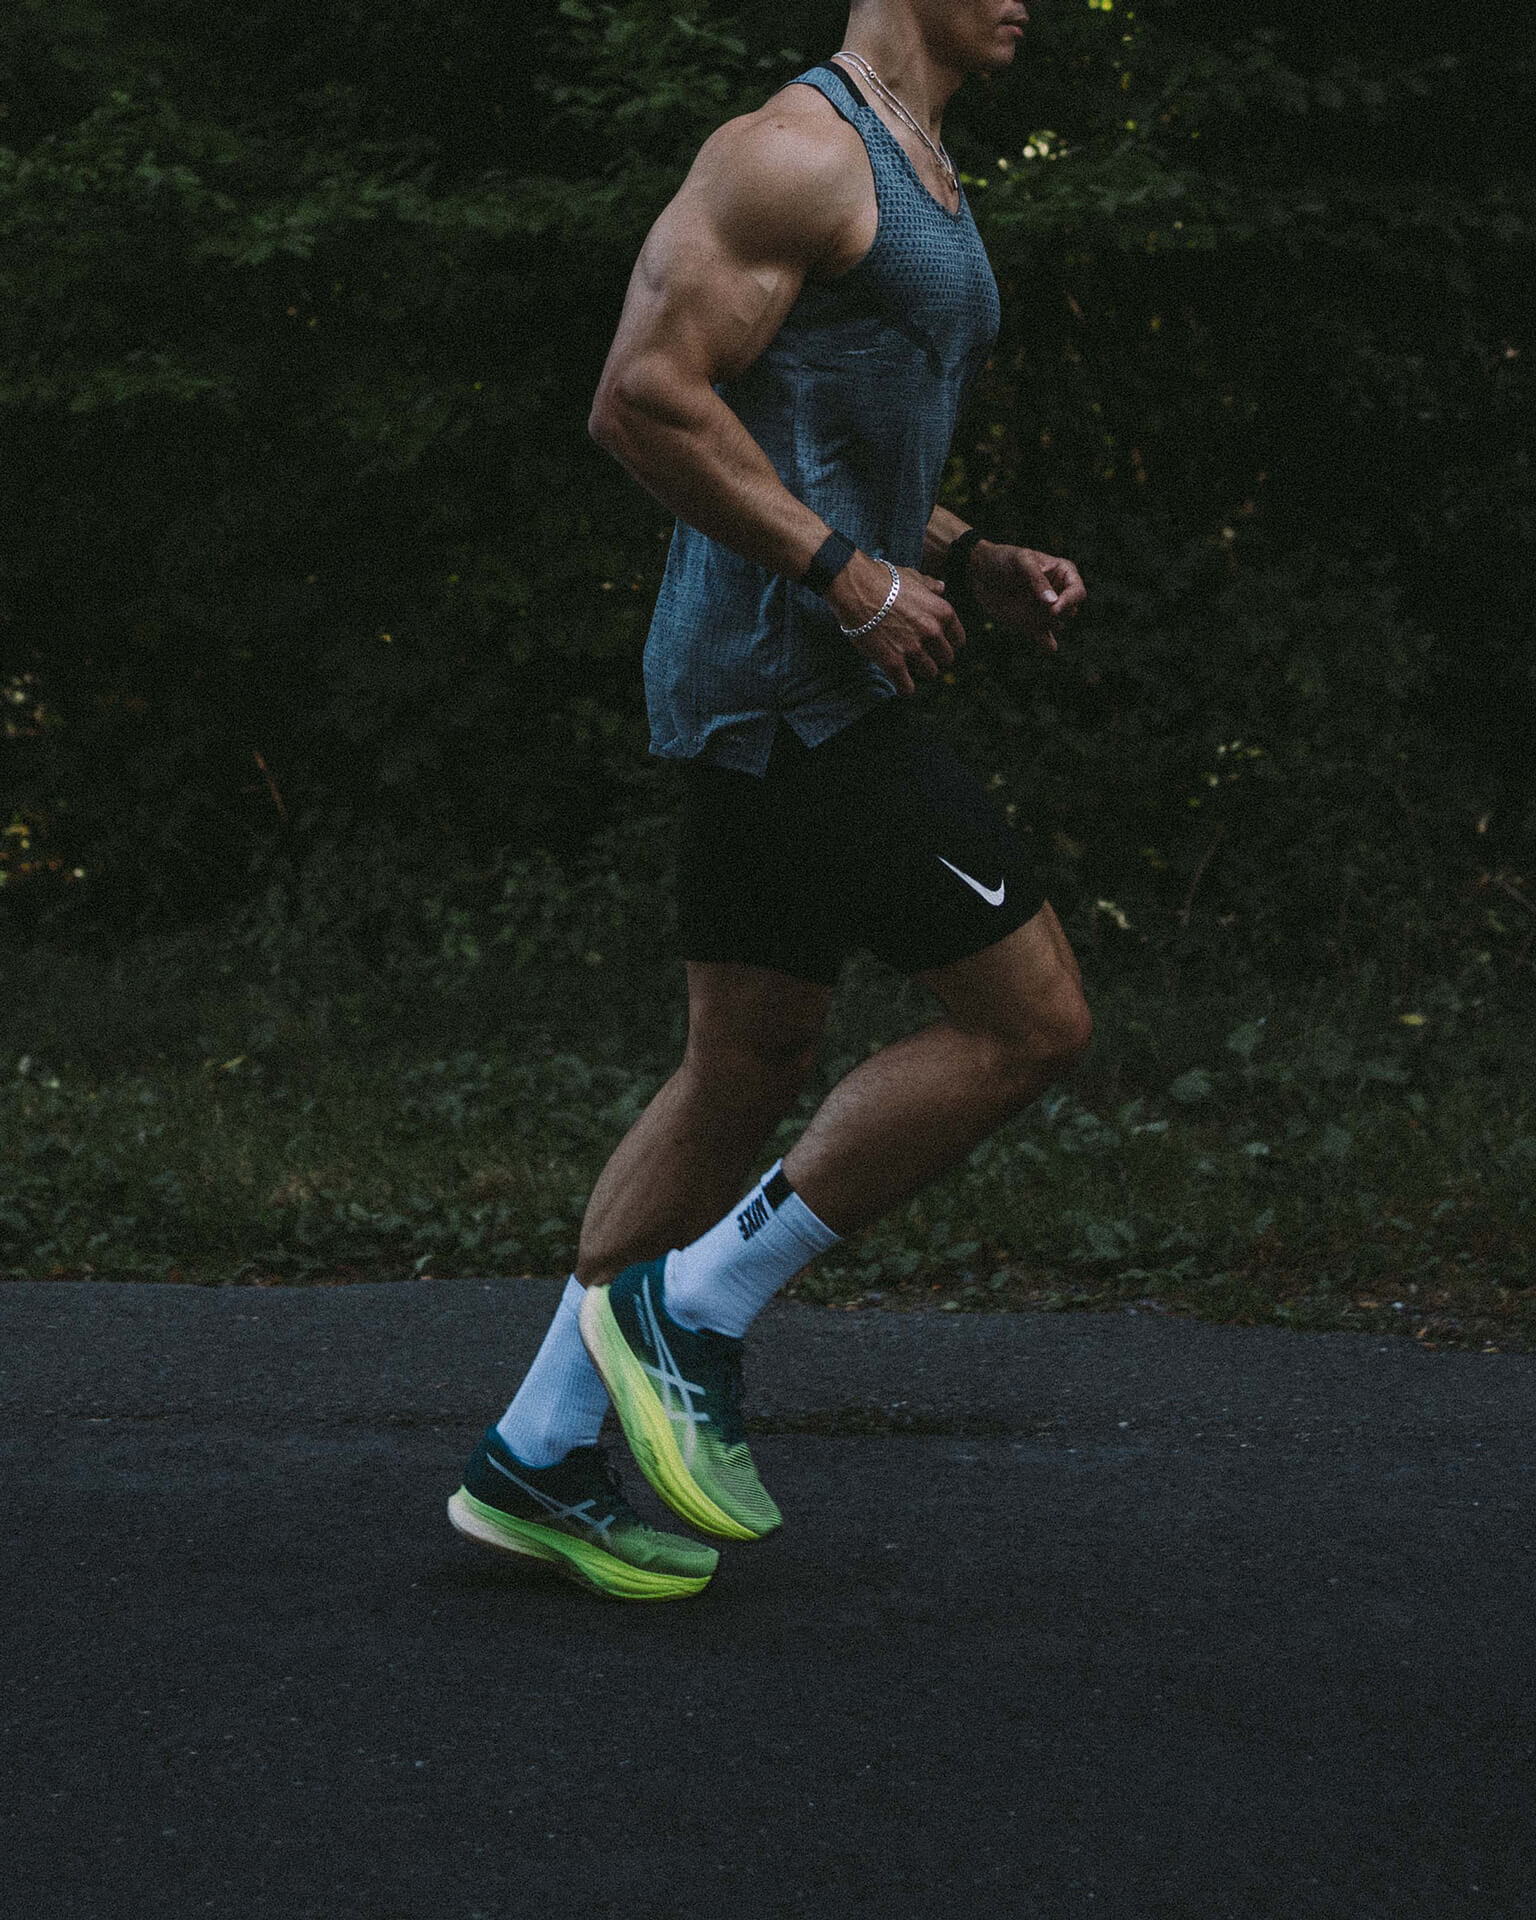 Image of a fitness male running outdoors on pavement wearing athletic wear